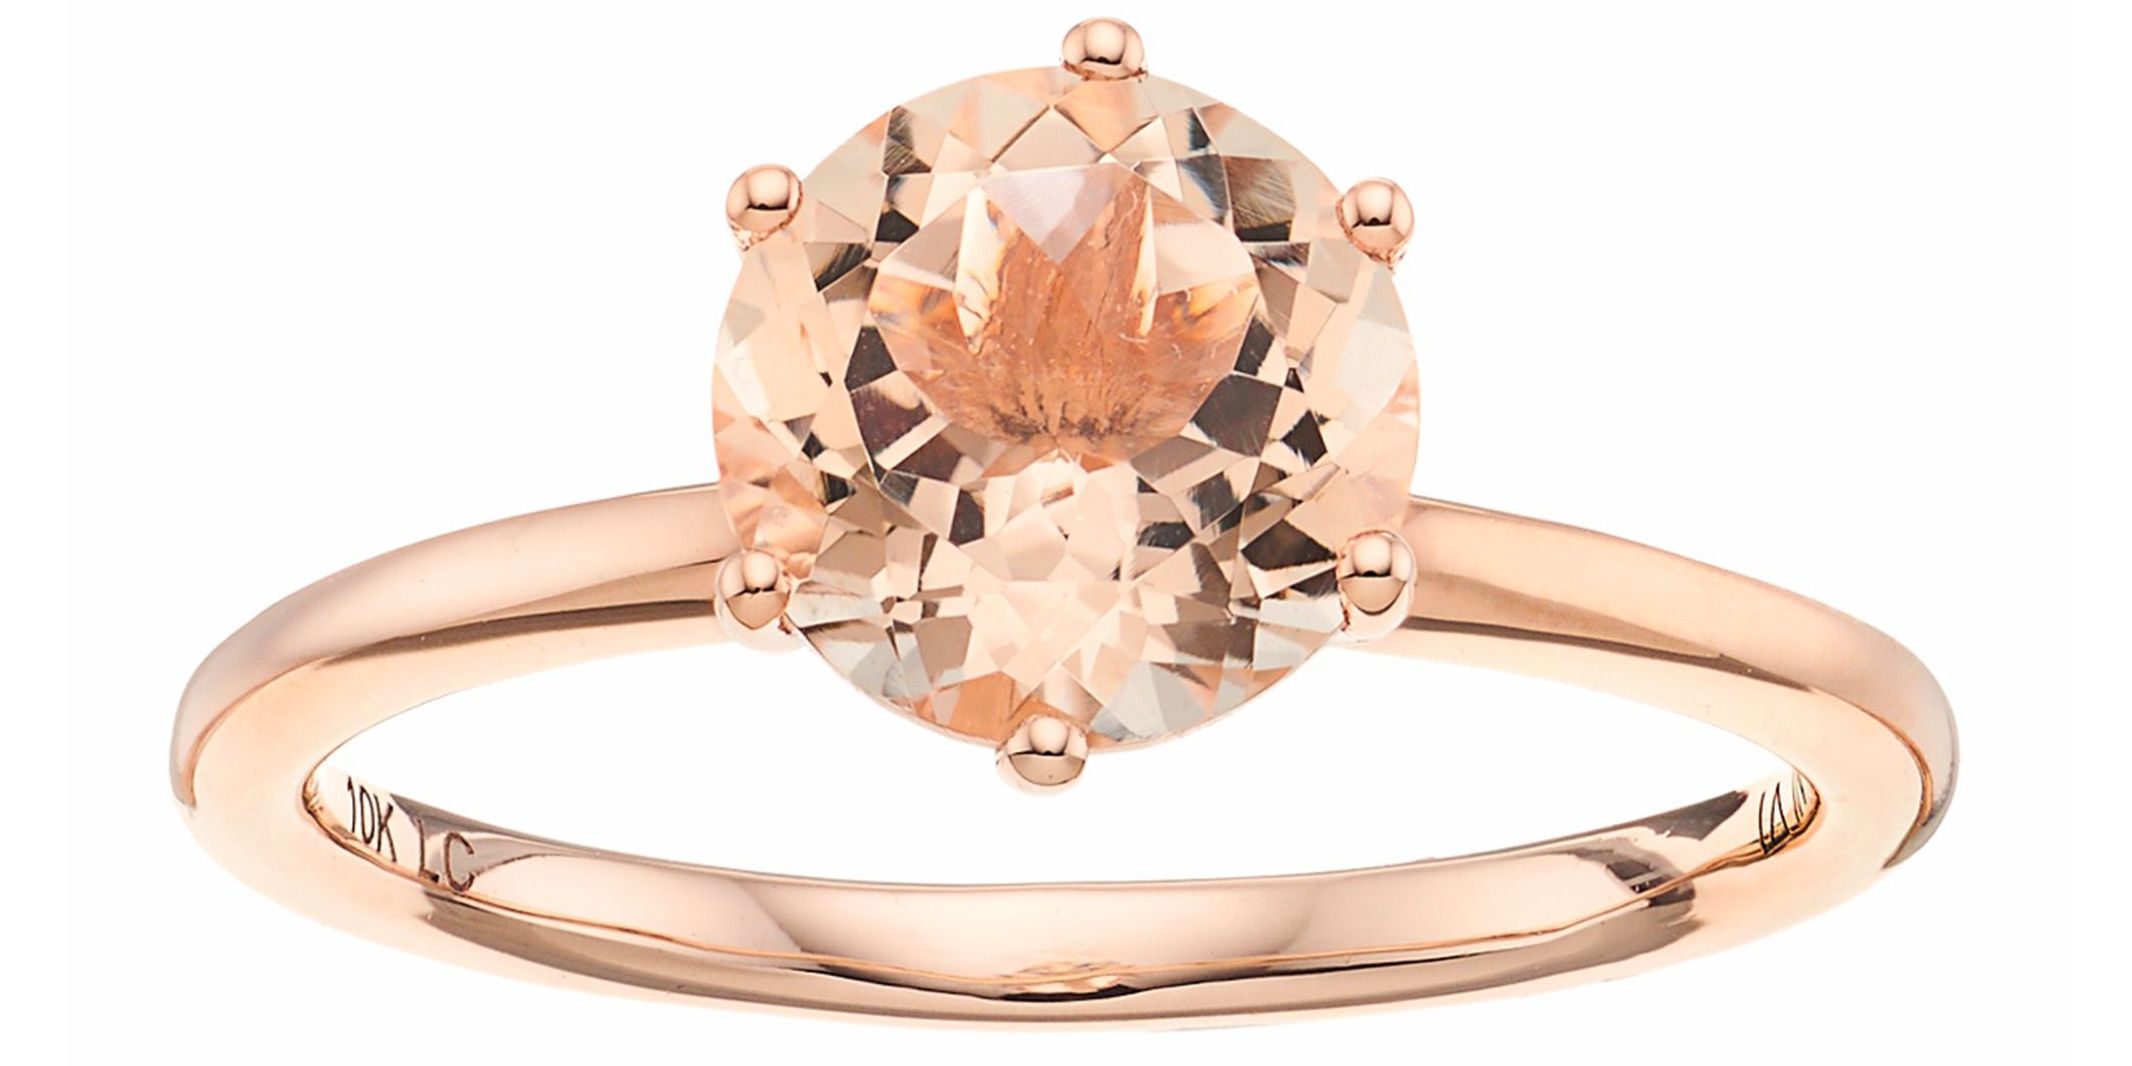 You Can Now Buy Lauren Conrad's Engagement Ring at Kohl's - LC's